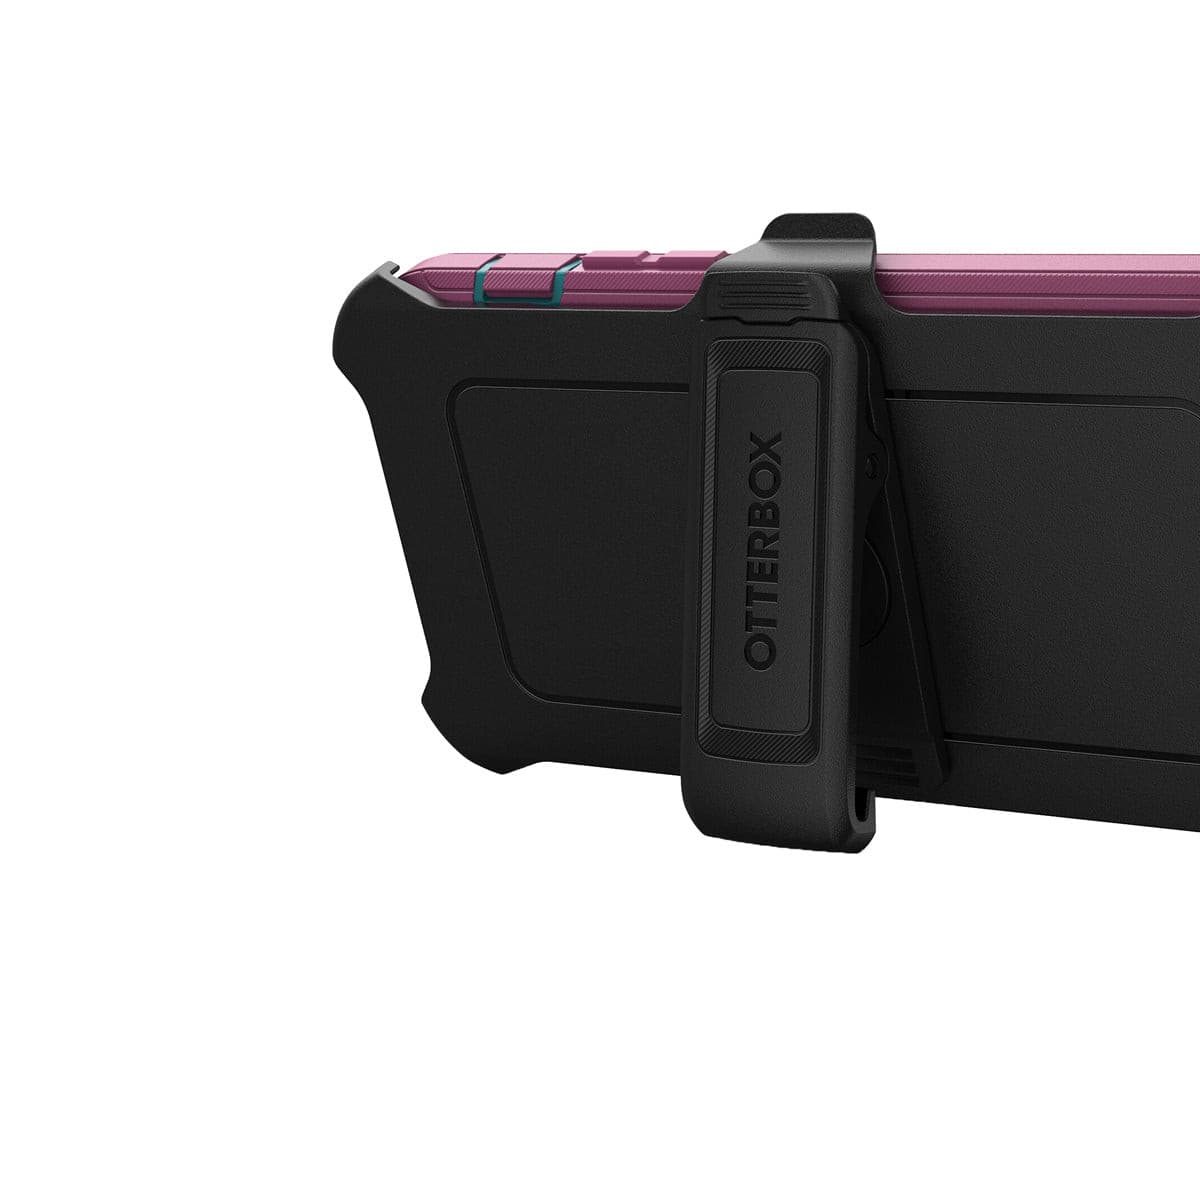 OtterBox Defender Case for iPhone 14 Pro Max.